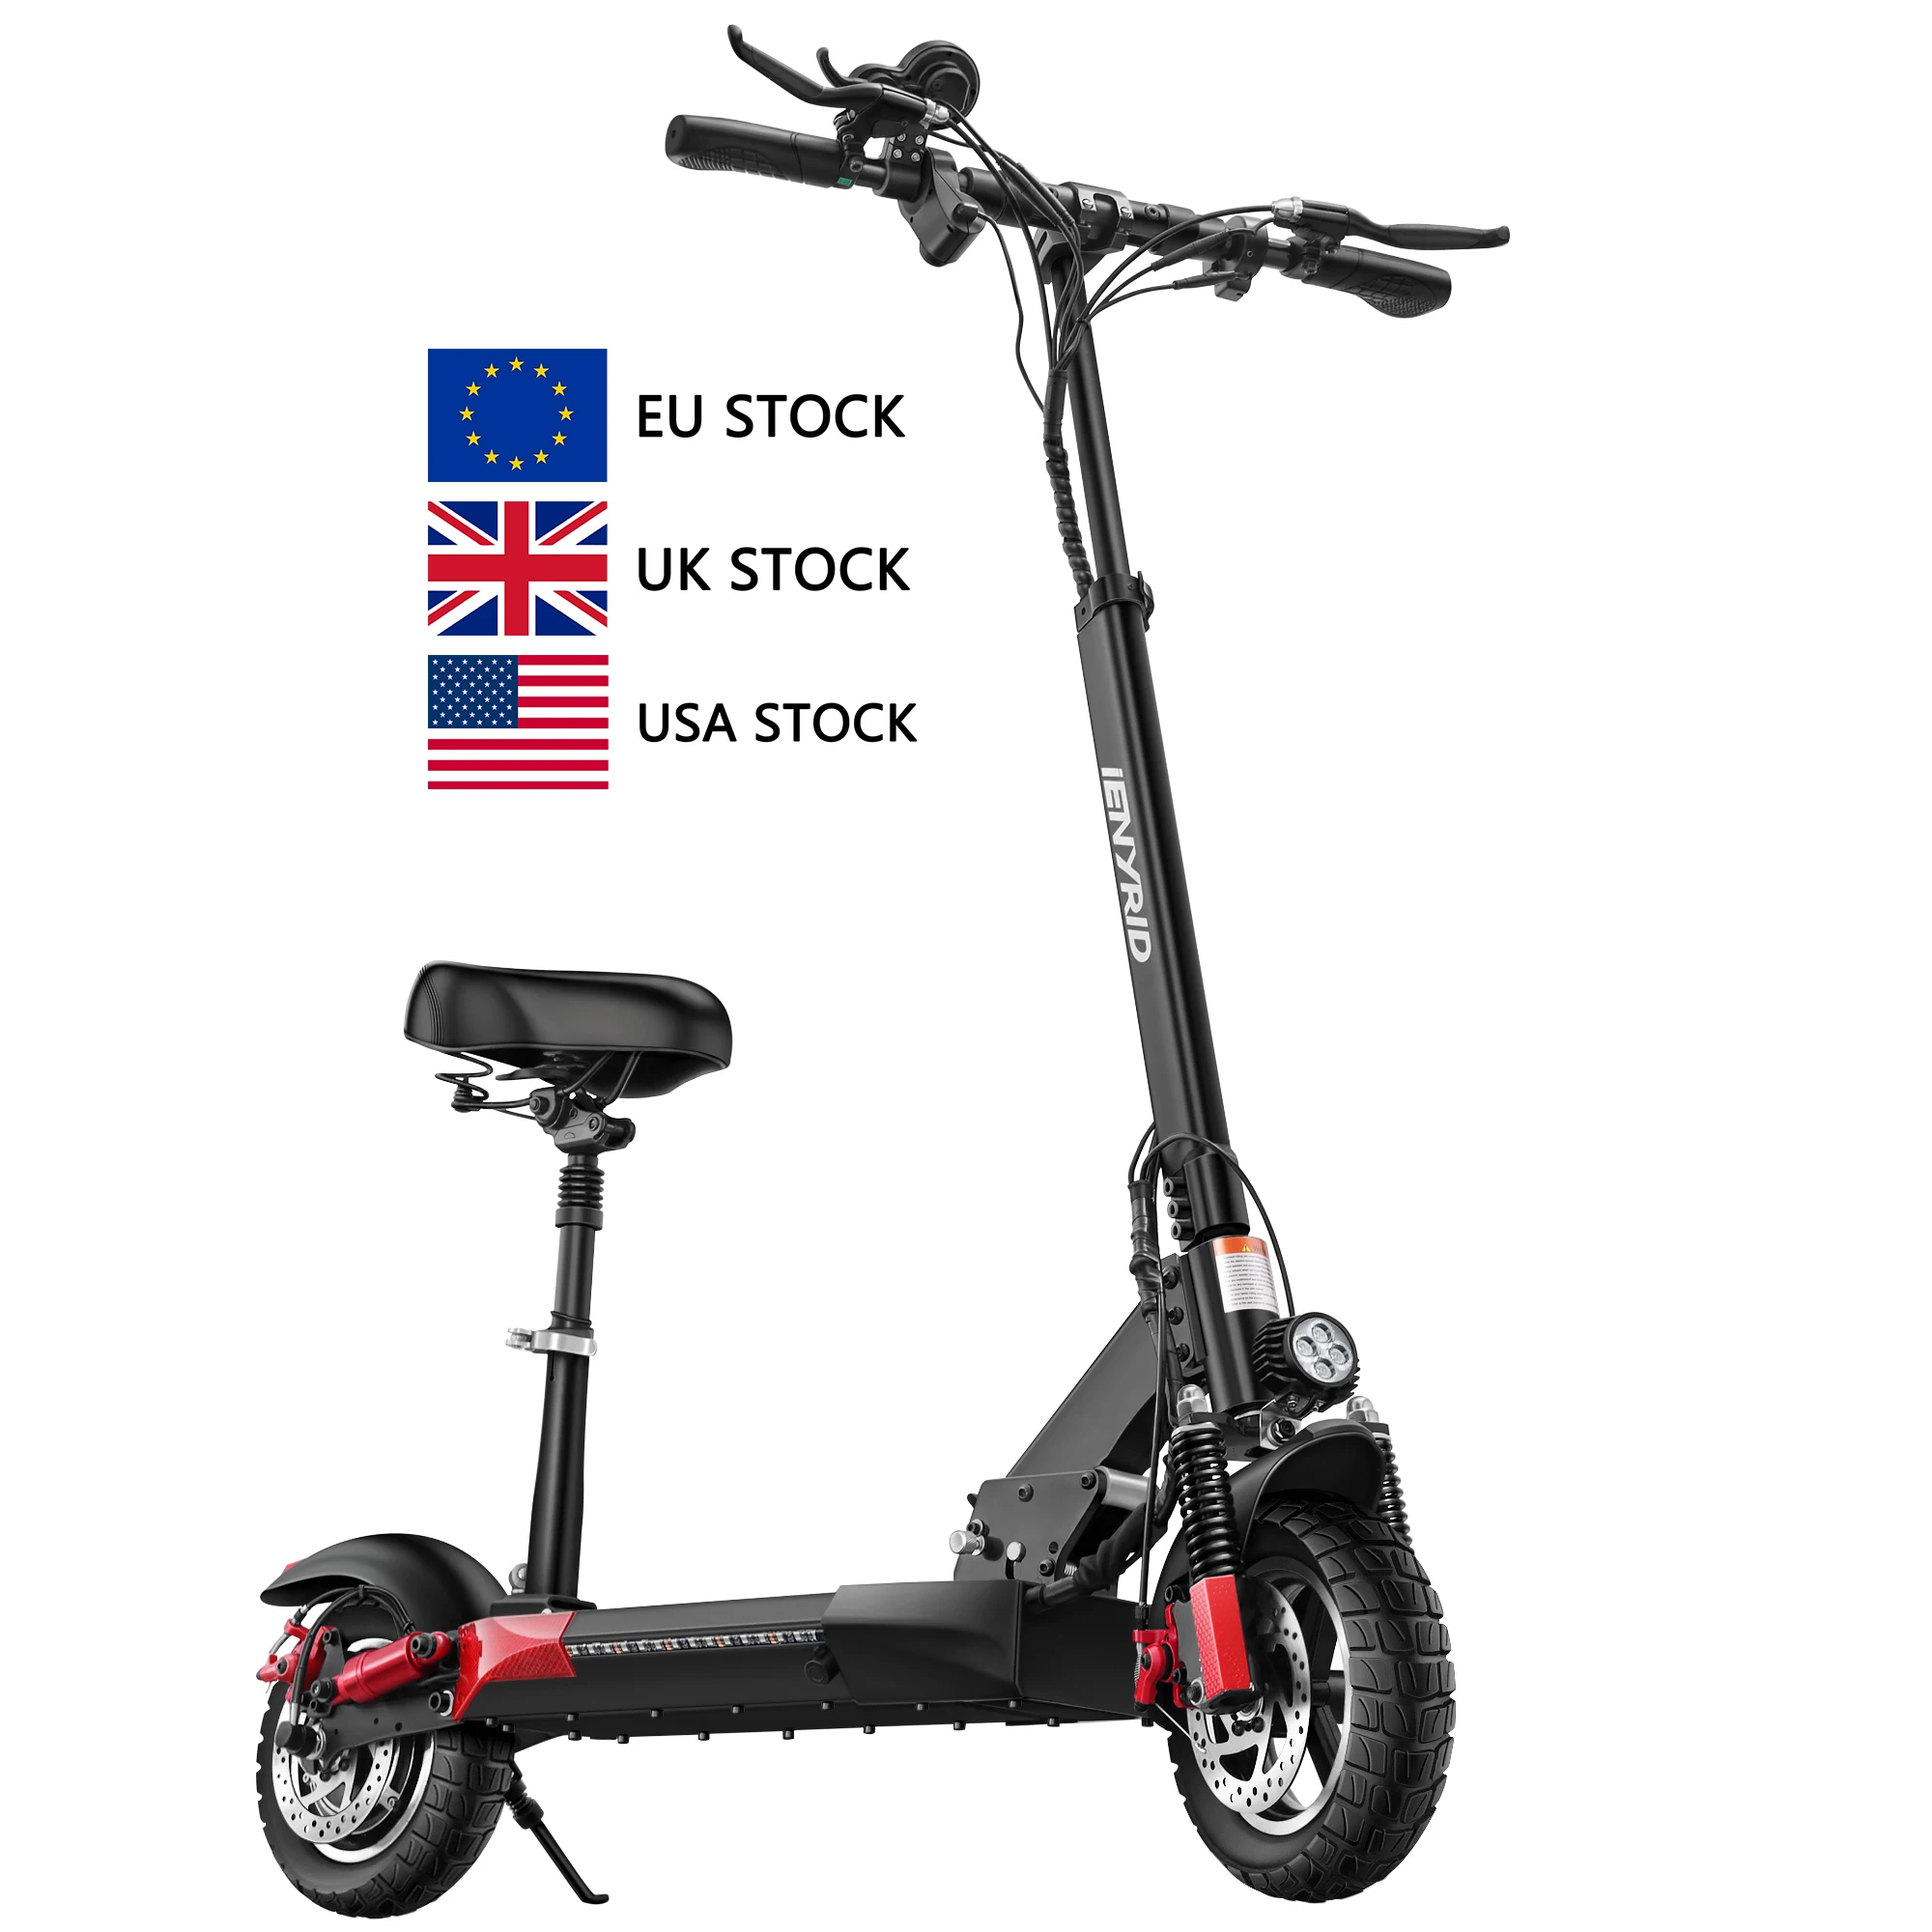 2021 EU warehouse upgraded 48V 500w 16ah battery iENYRID M4 PRO ODM/OEM 10" Off-road Tires Folding Electric Scooter